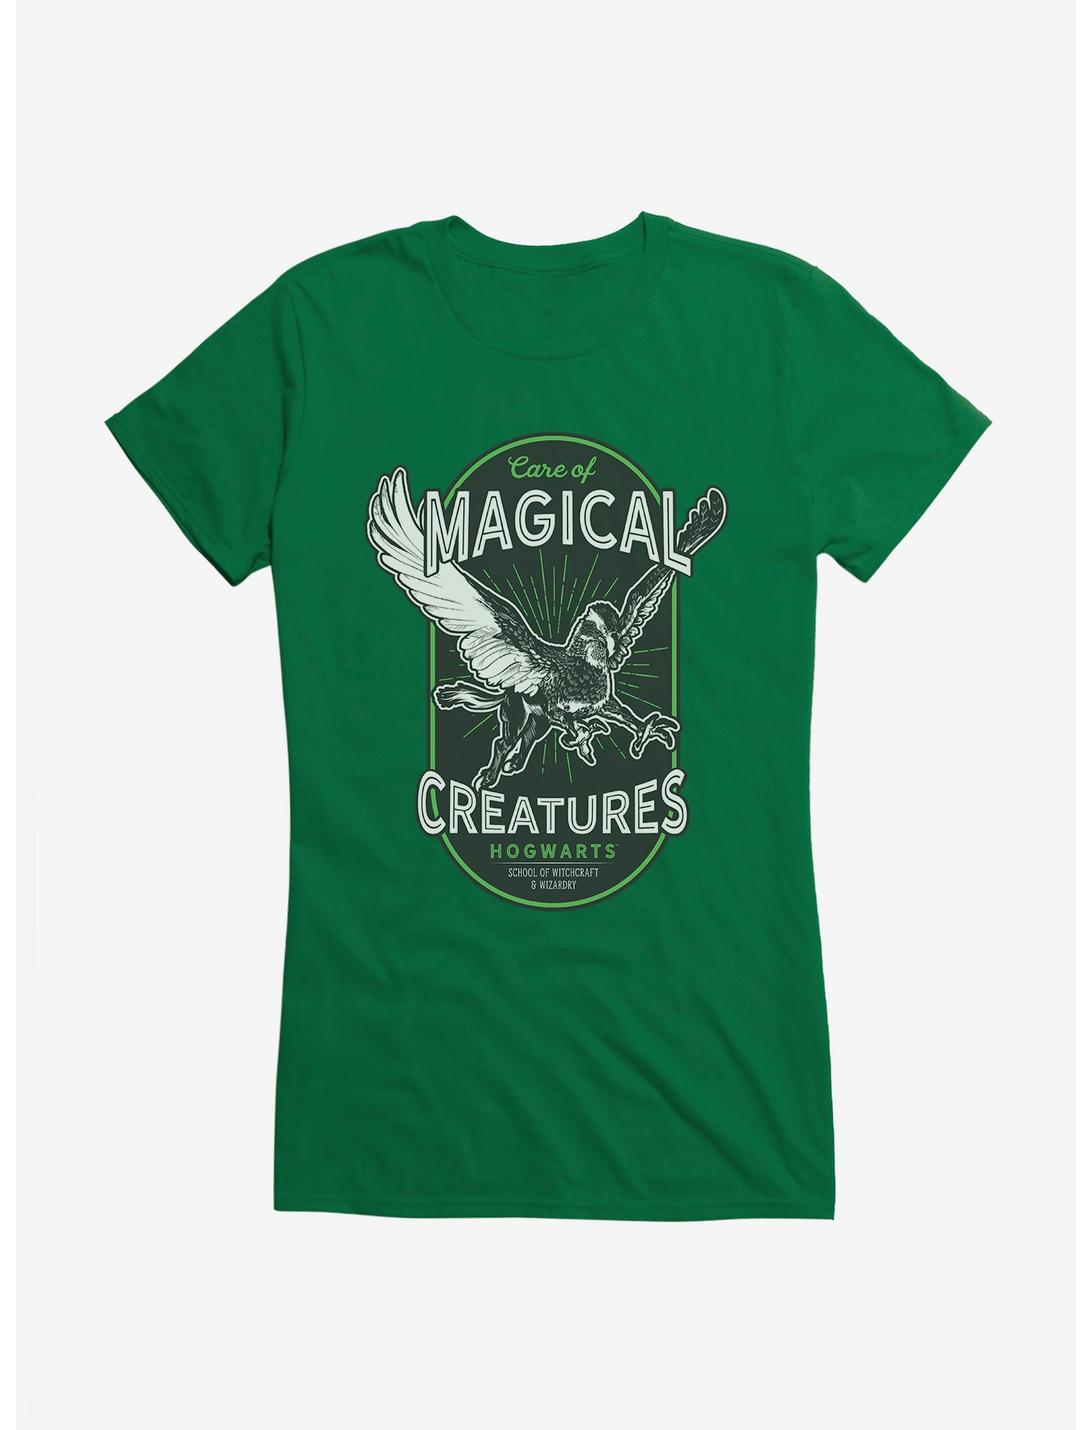 Harry Potter Care Of Magical Creatures Girls T-Shirt, , hi-res